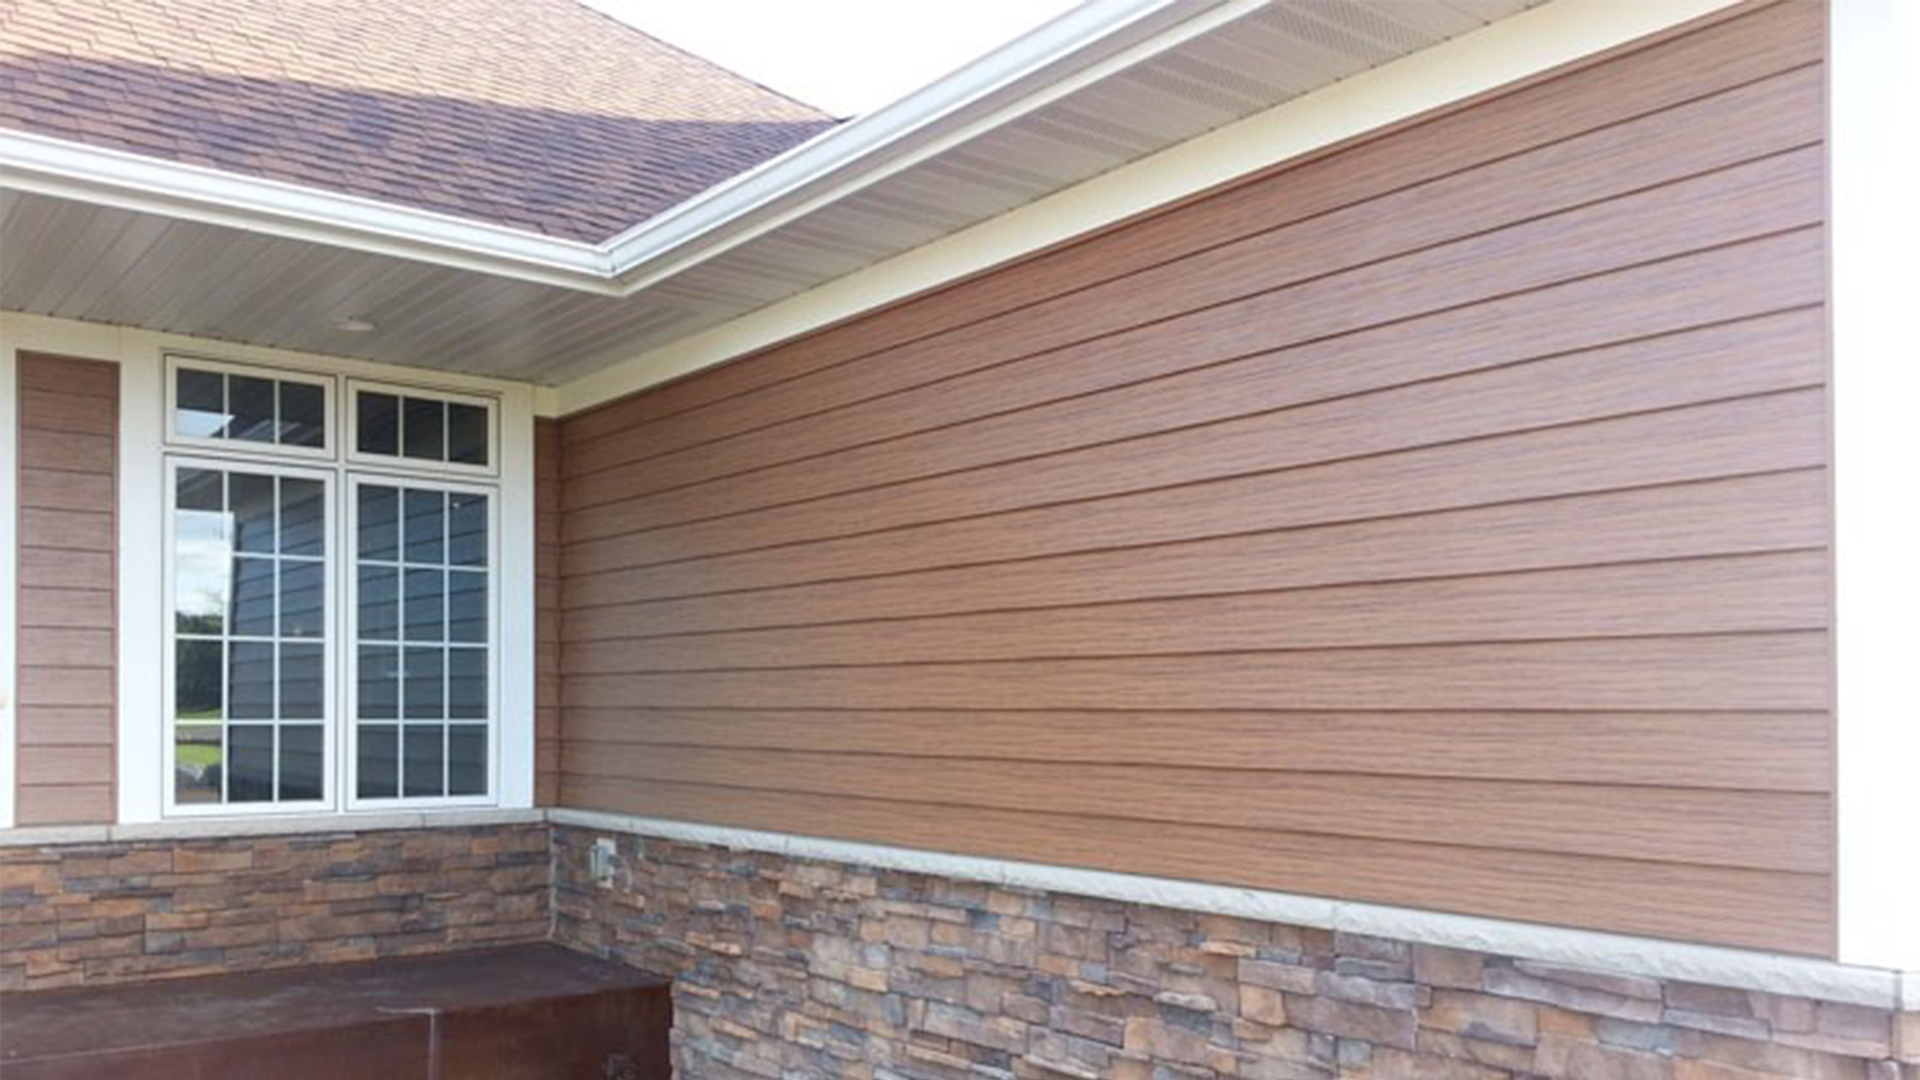 ABC's seamless siding, shown here, makes it the top siding contactor in Lincoln.